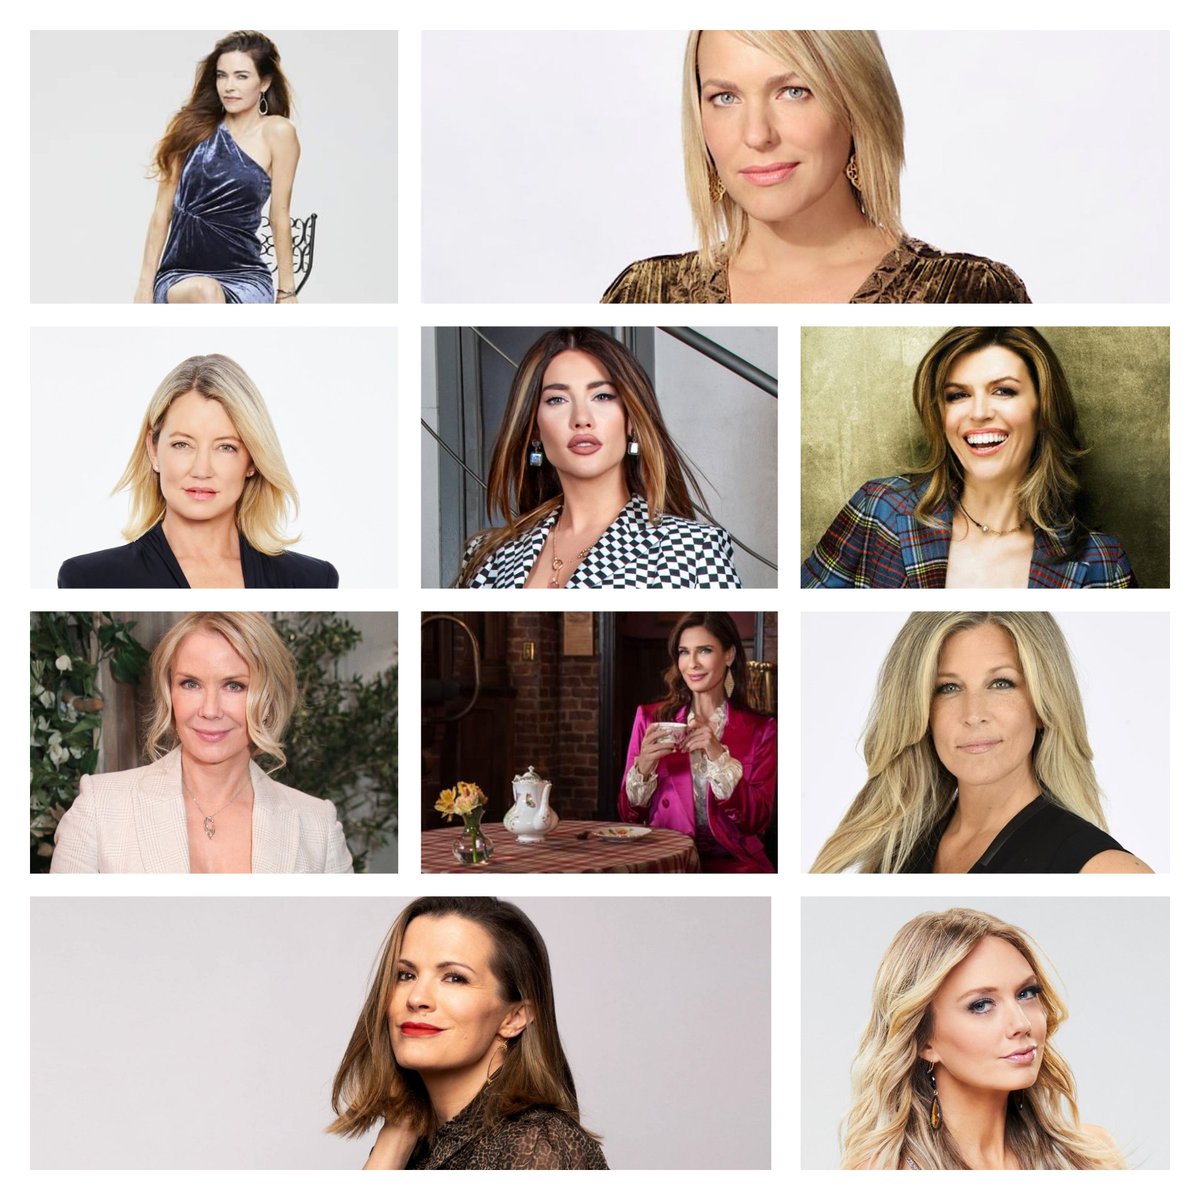 Congratulations to this year's lead actress nominees for the Soapparty awards (the link to vote is in our bio) #beyondSalem #BoldandBeautiful #Days #GH #YR